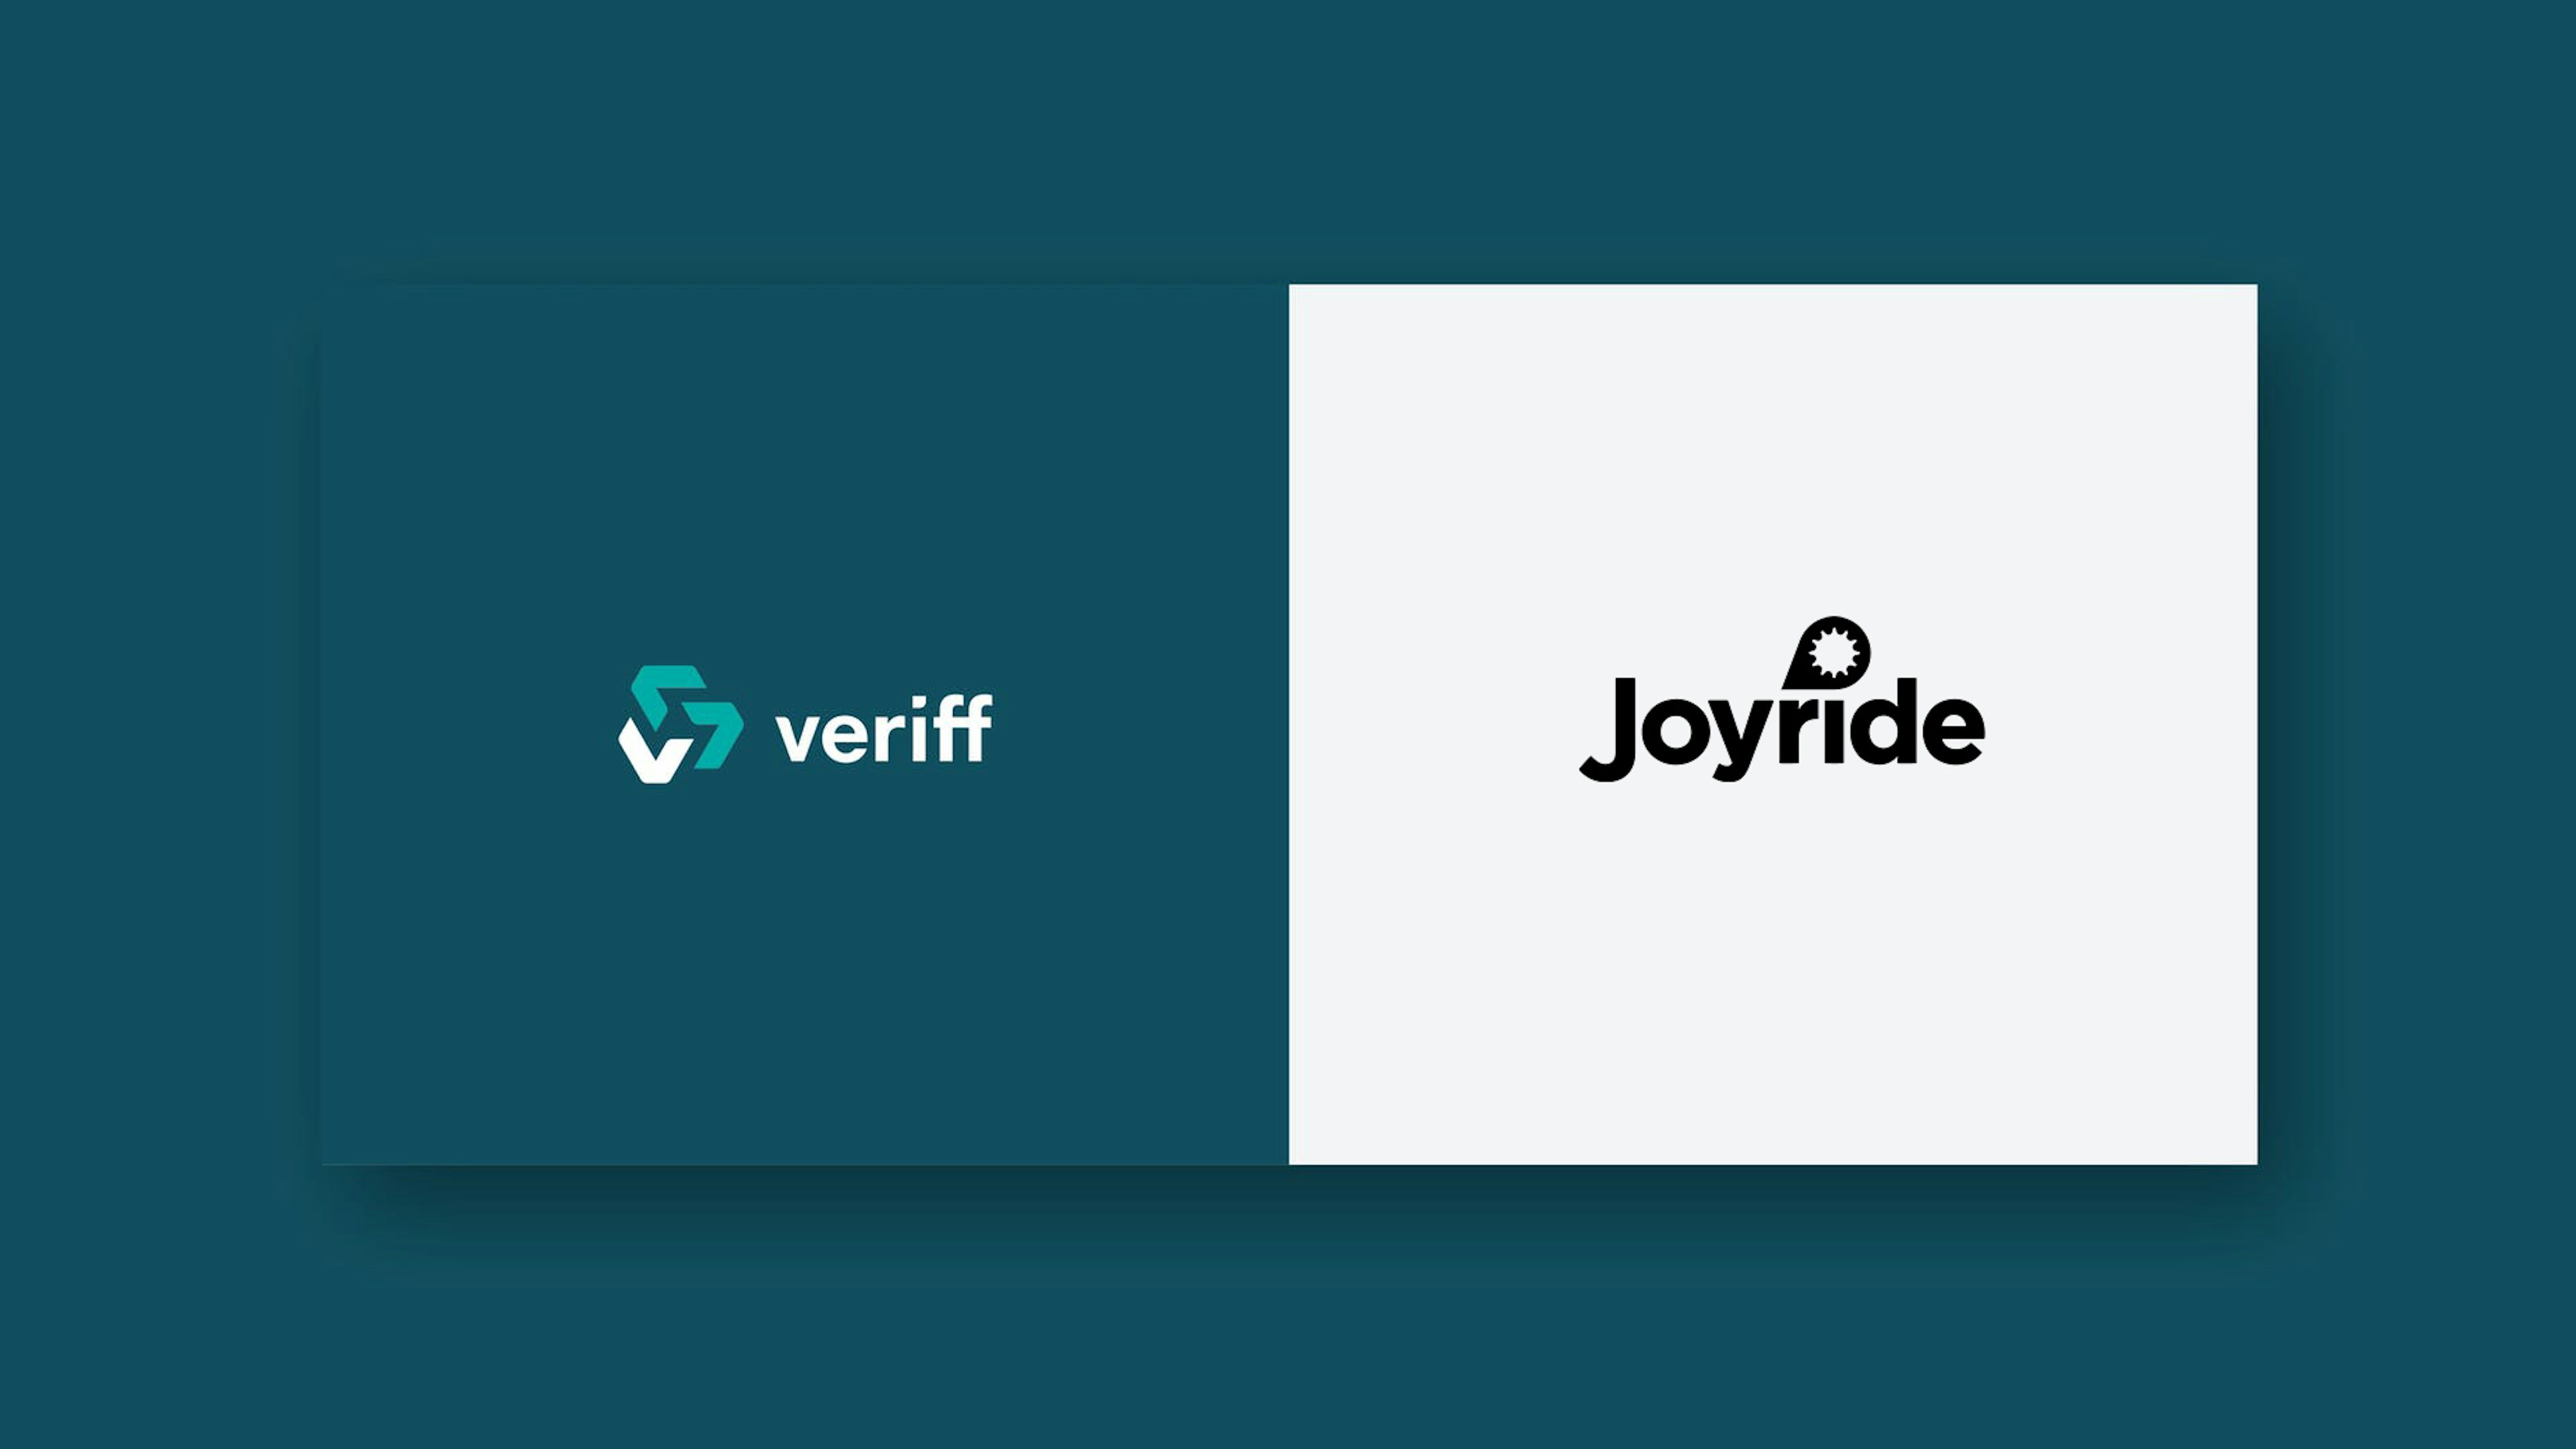 How Veriff And Joyride Are Partnering To Combat Mobility Fraud